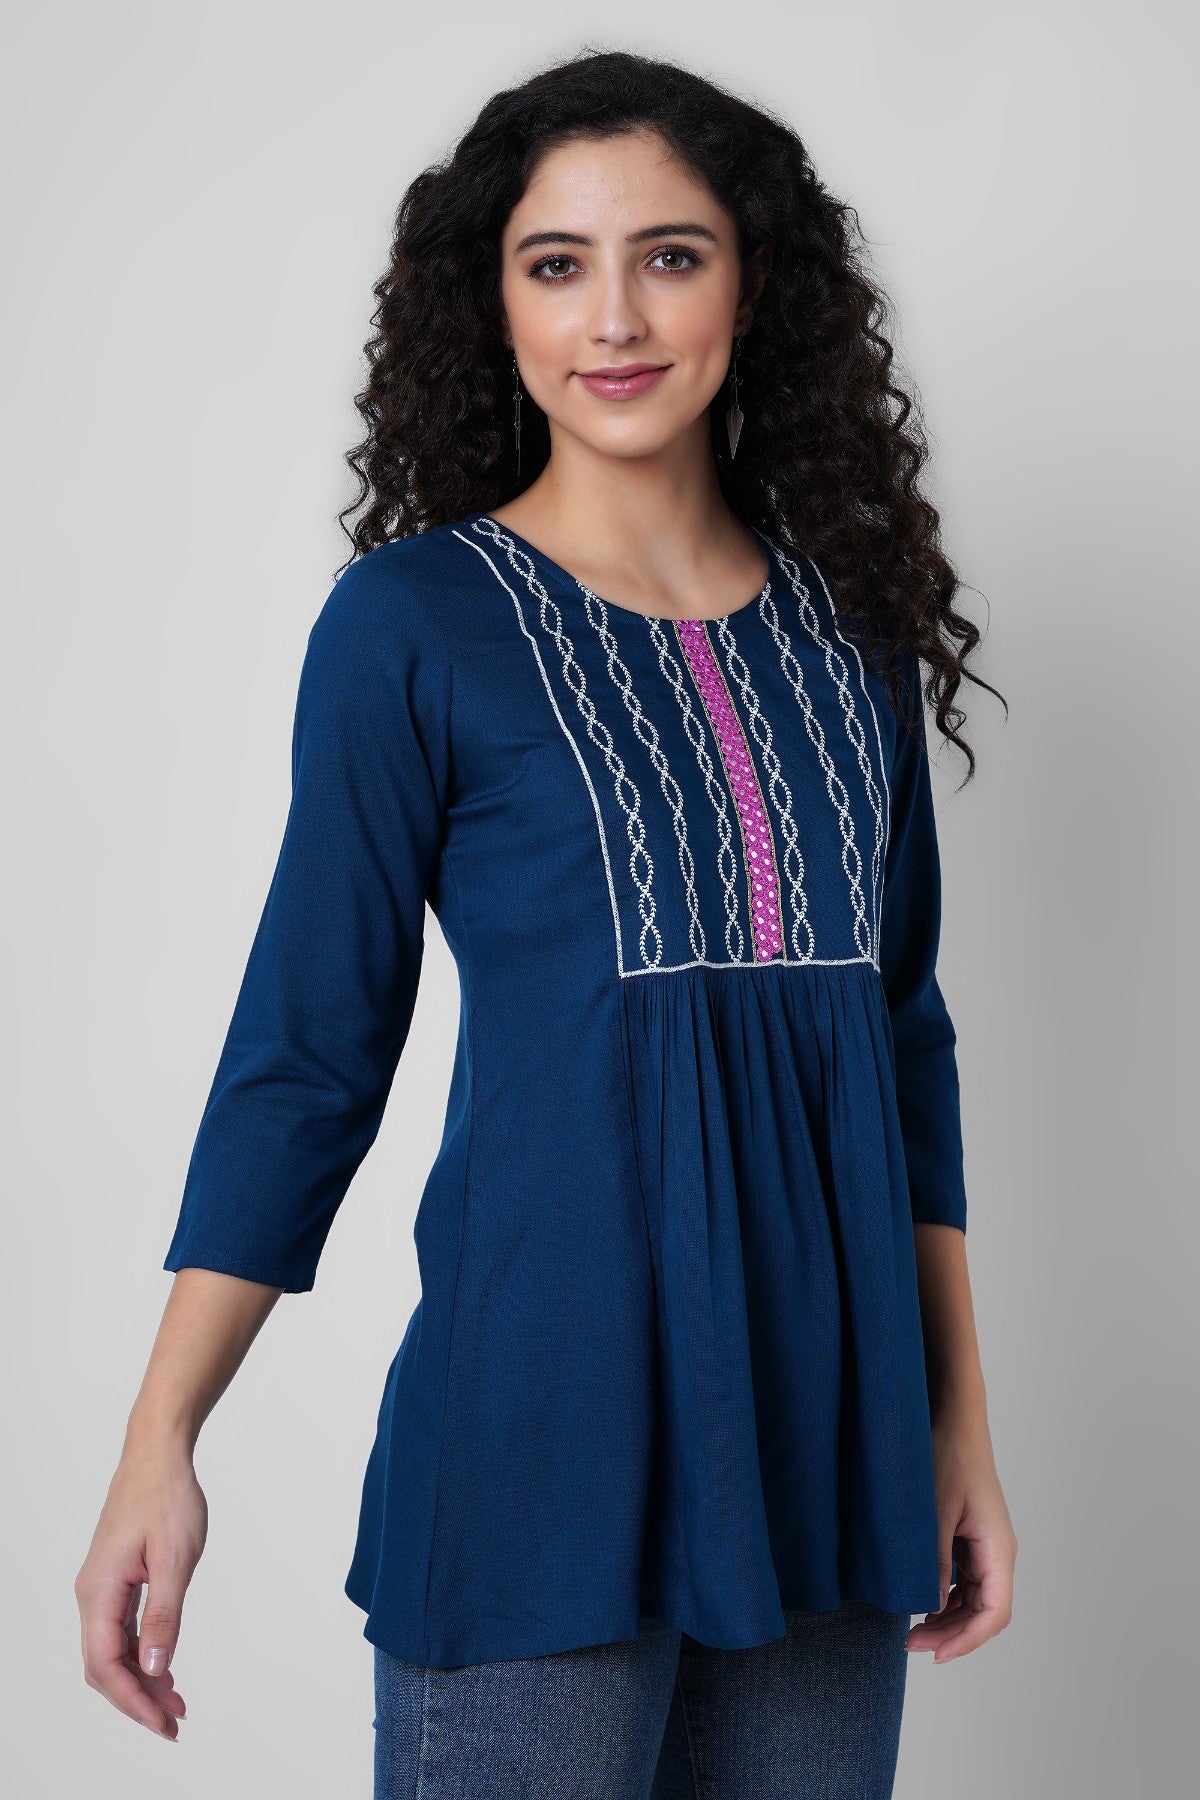 Blue Top With Mirror Embroidery